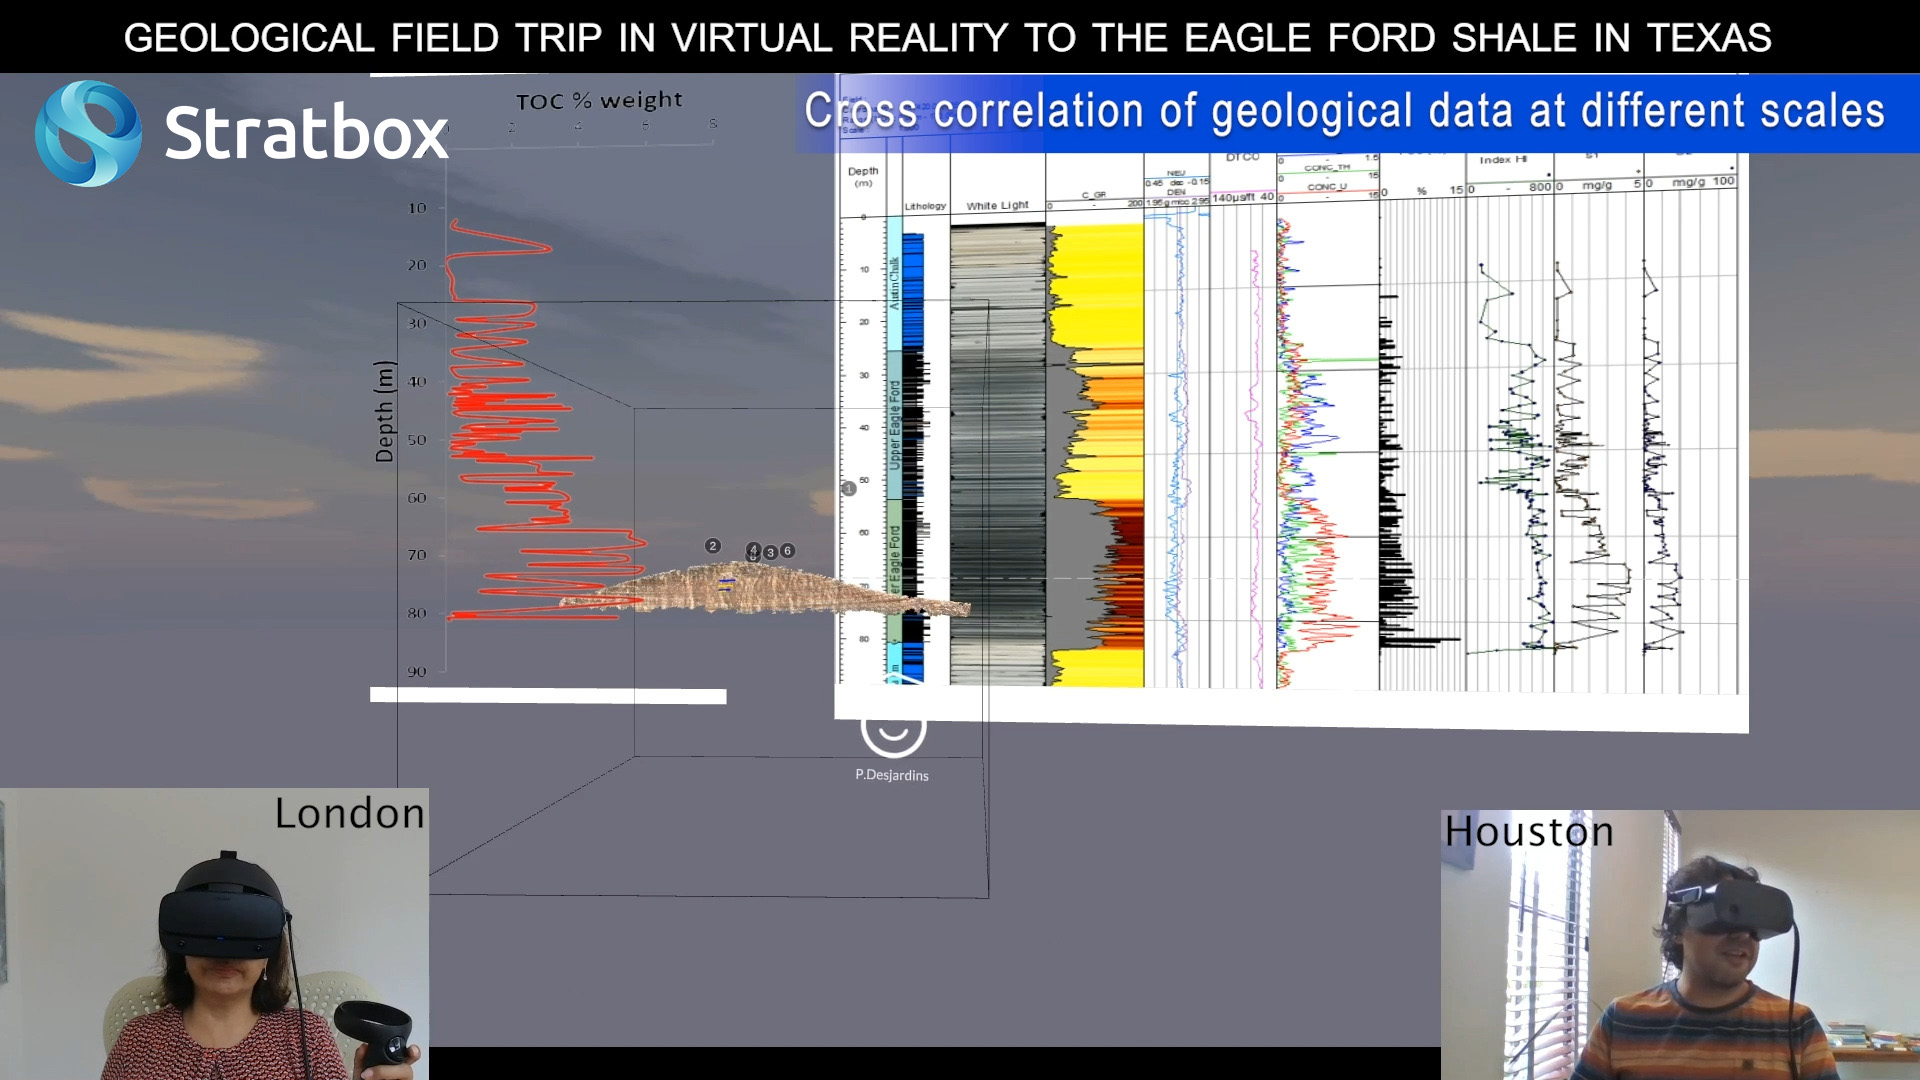 Geologists a virtual geology field trip using Stratbox VR. 3D model at scale next to wireline logs